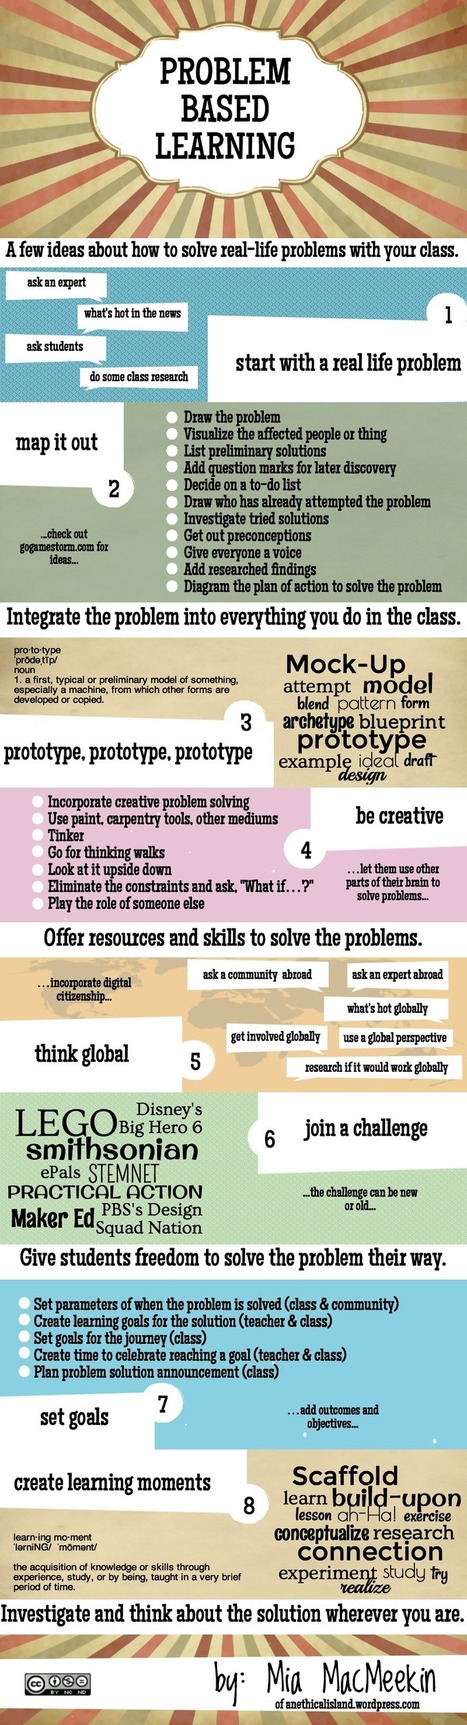 PBL- Let the Class Solve World Problems | Infographic | 21st Century Learning and Teaching | Scoop.it